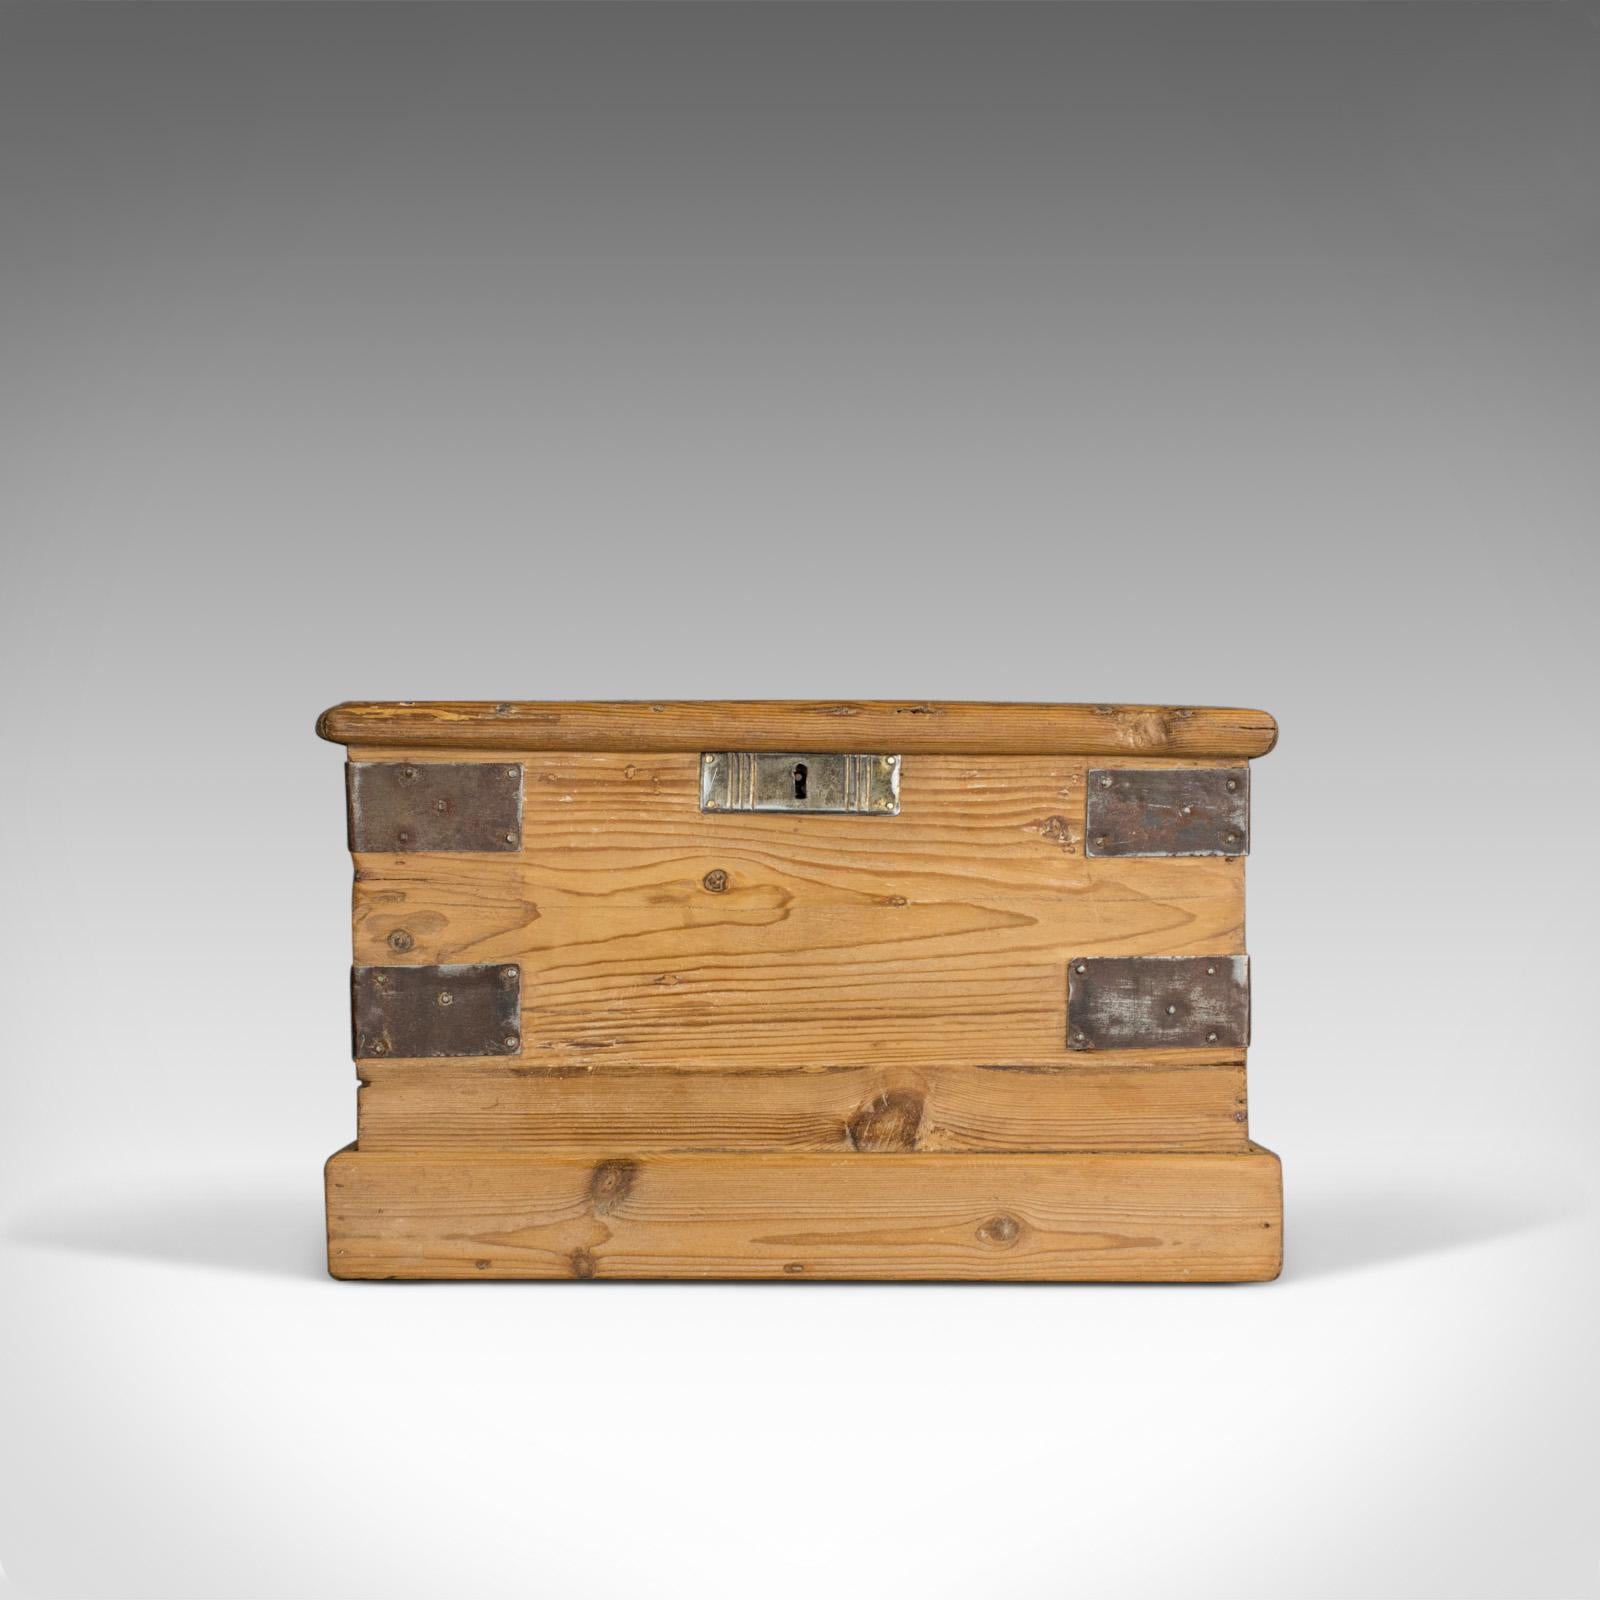 This is a small antique carriage chest. An English, Victorian, metal-bound pine trunk dating to the mid 19th century, circa 1870.

Crafted in antique pine displaying grain interest throughout
Good consistent colour and a desirable aged patina
Of